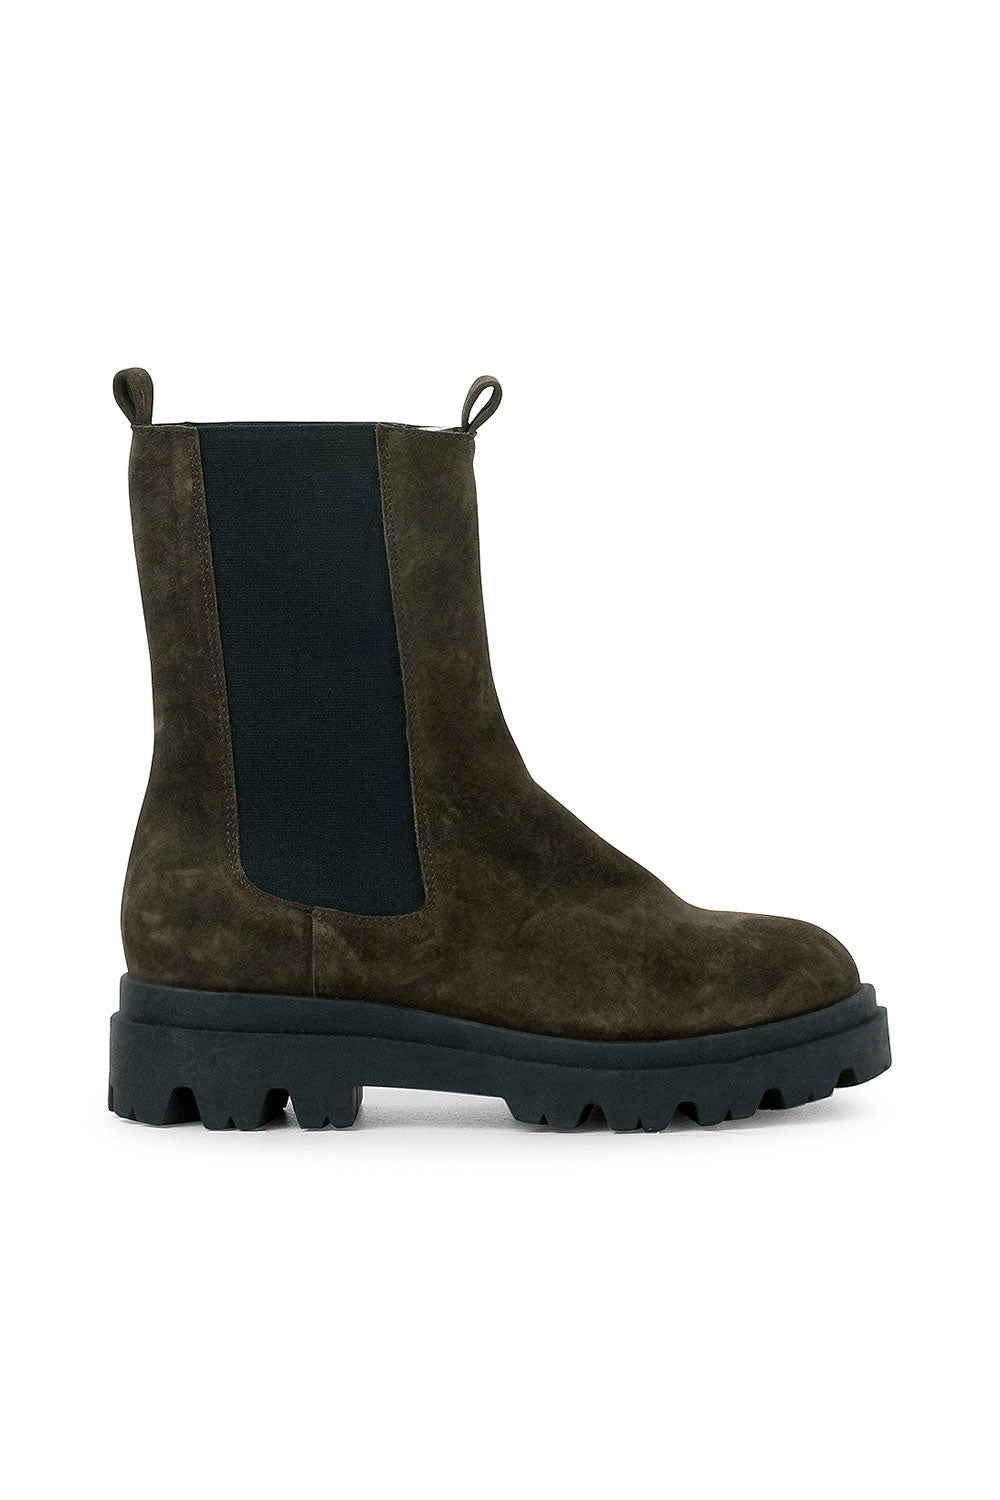 Pavement Boot Sia Green Suede